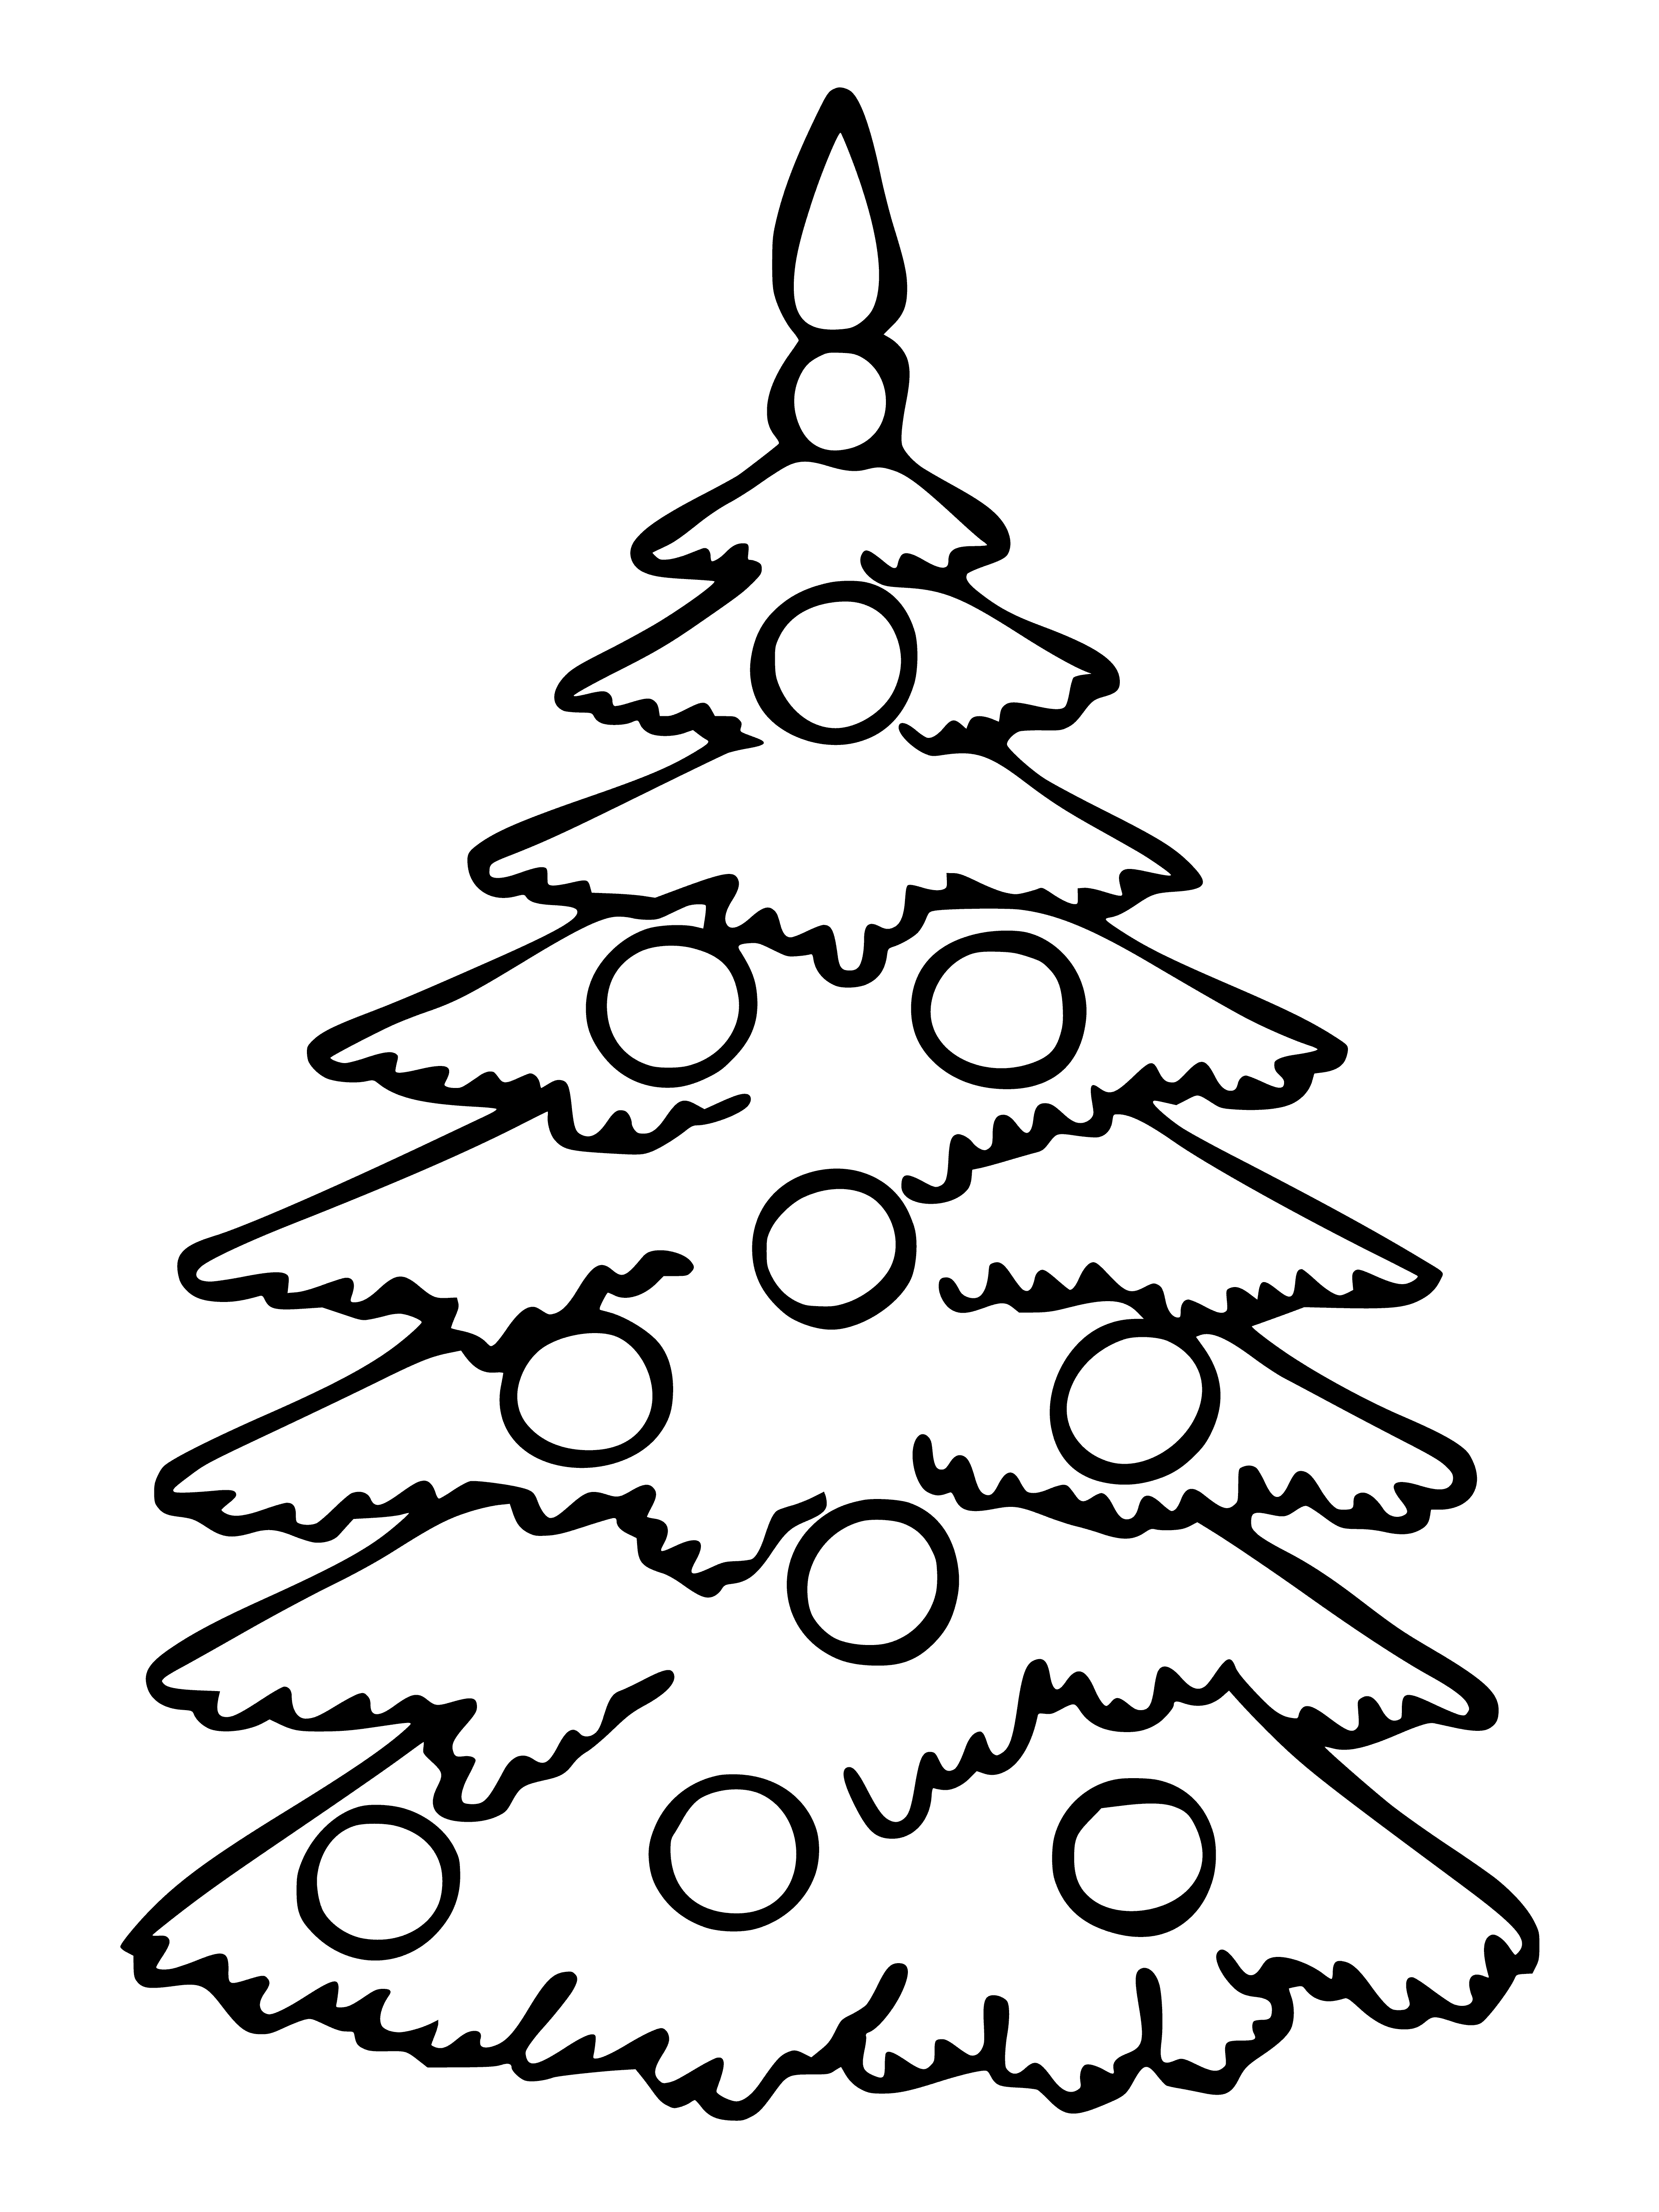 coloring page: A Christmas tree surrounded by presents, a star on top, and garland - a perfect holiday scene!